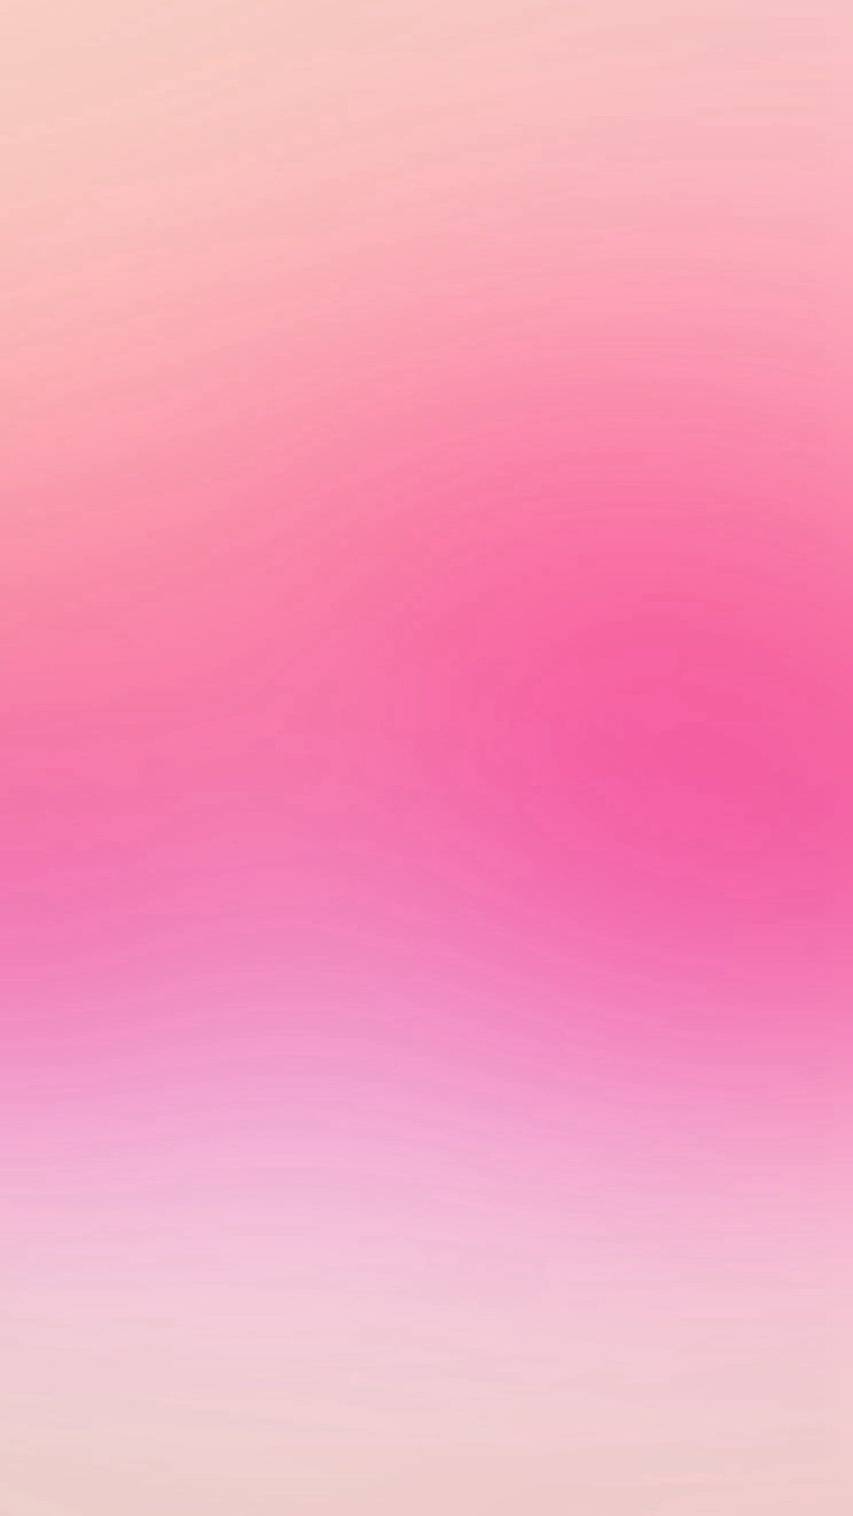 Simple Pink Aesthetic iPhone Pictures free